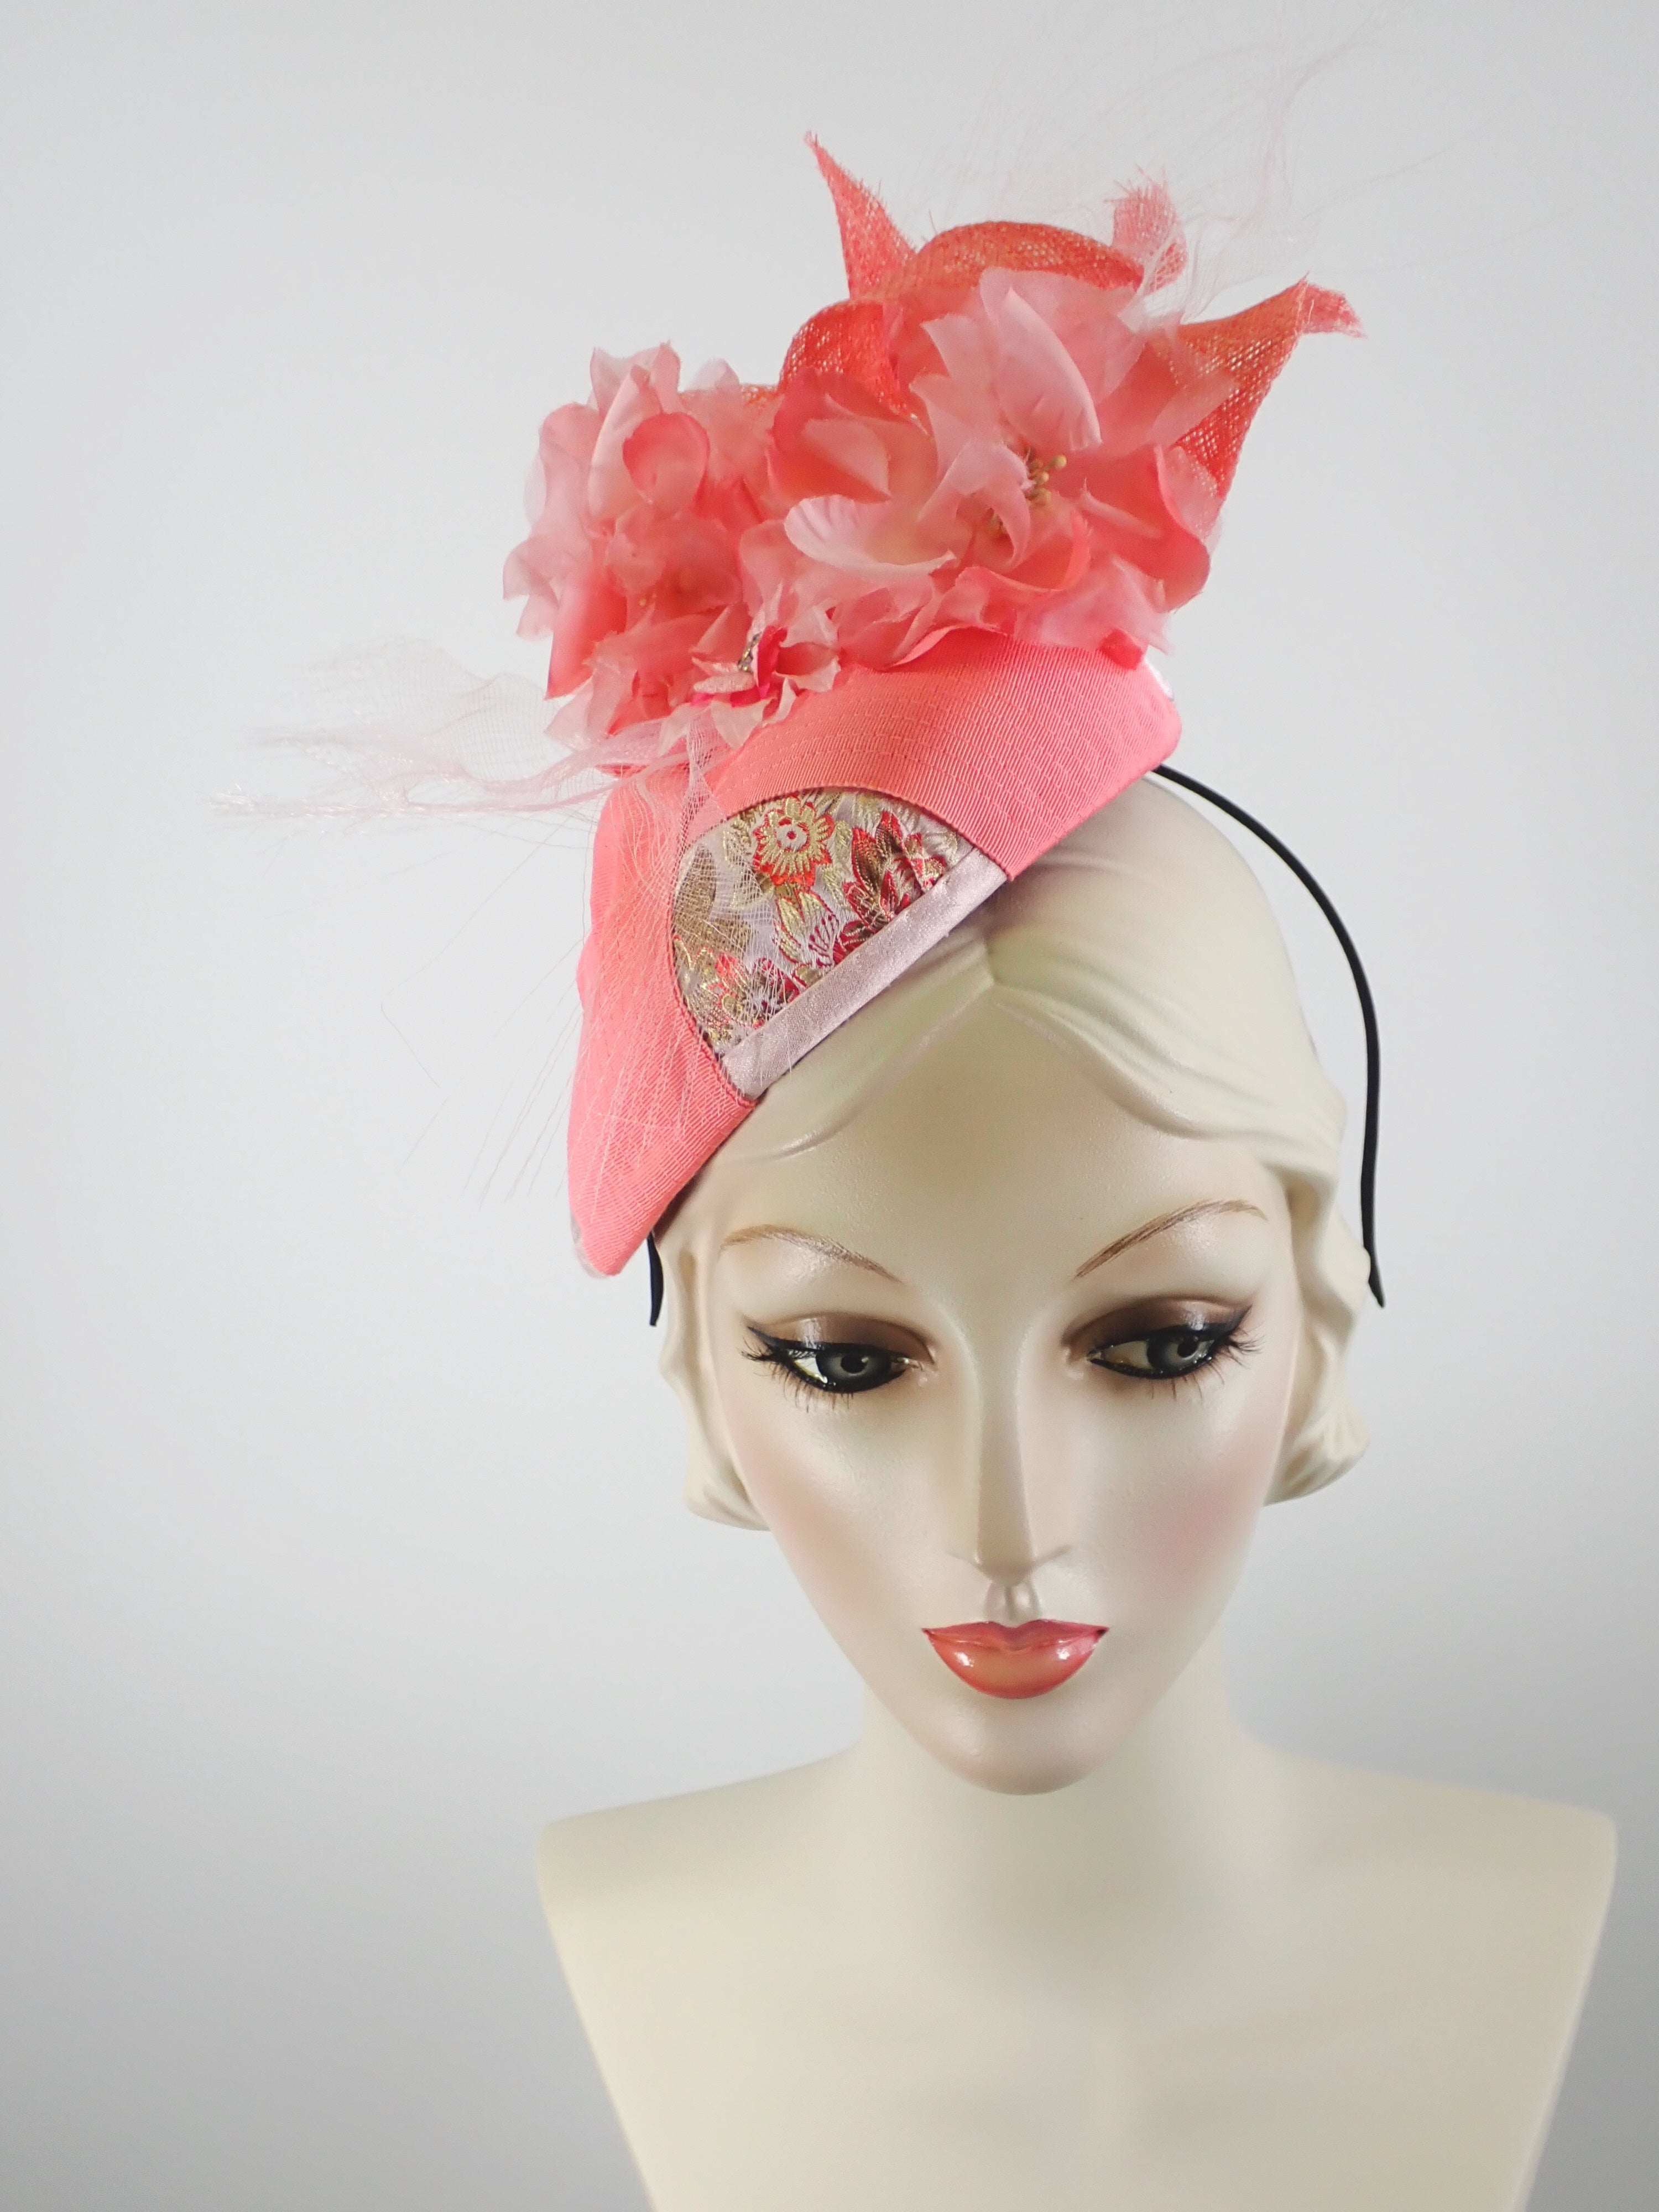 Women's Coral, and Pale Pink Ribbon and Sinamay Fascinator Hat for Kentucky Derby - Summer Fascinator for Church